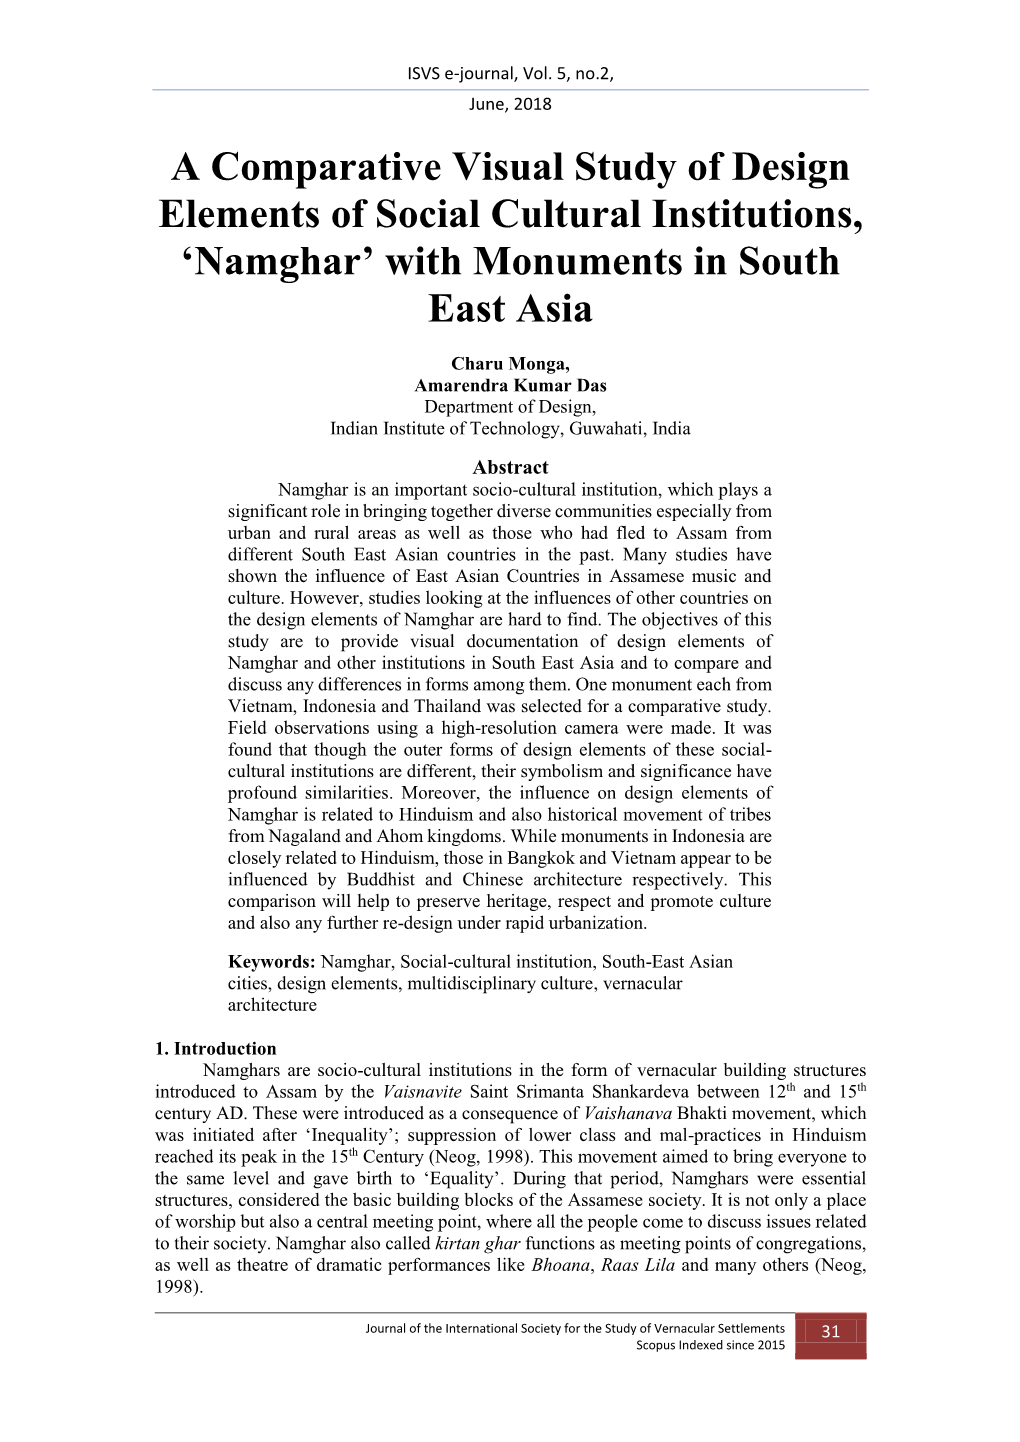 Namghar’ with Monuments in South East Asia